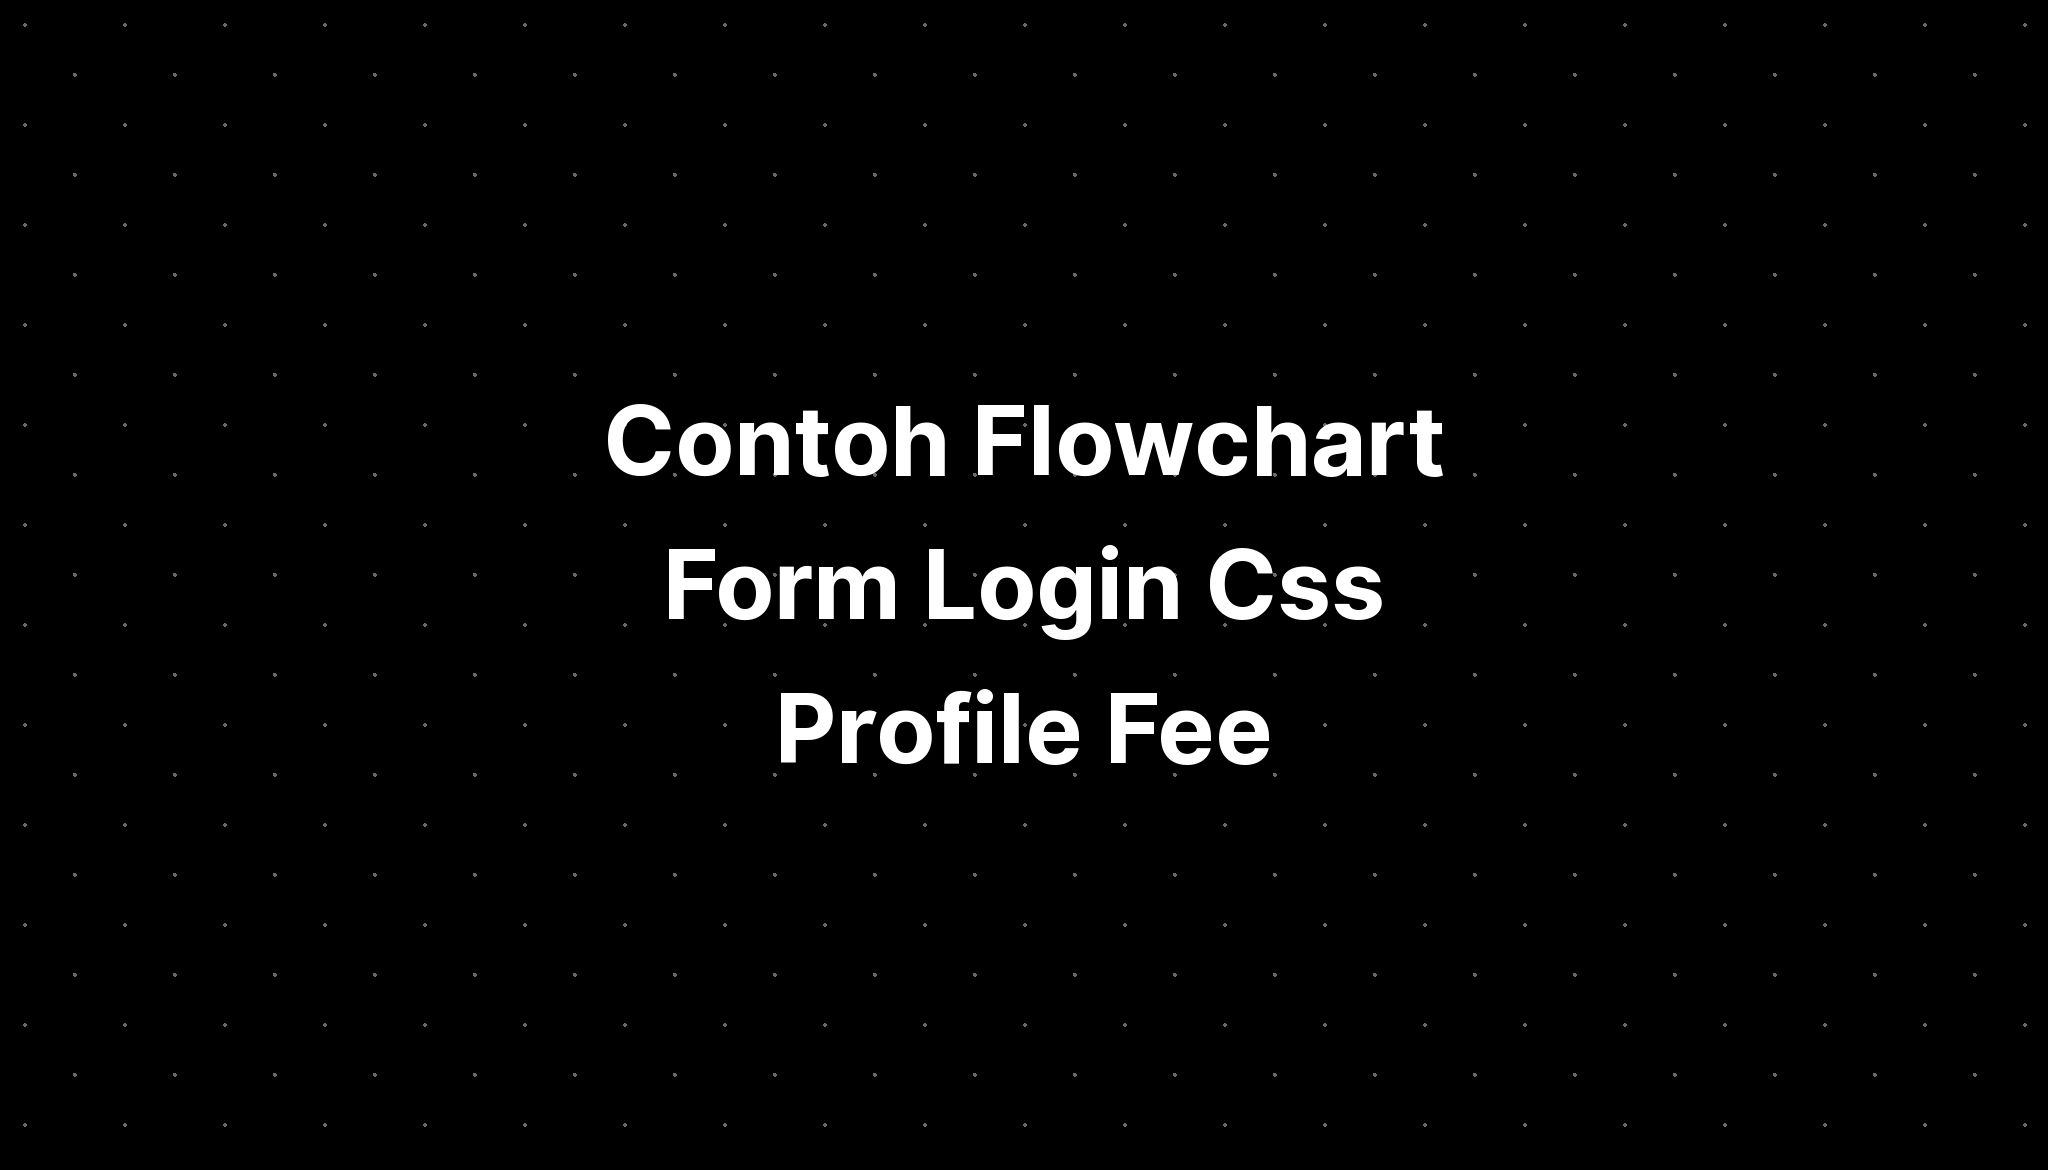 contoh-flowchart-form-login-css-profile-fee-imagesee